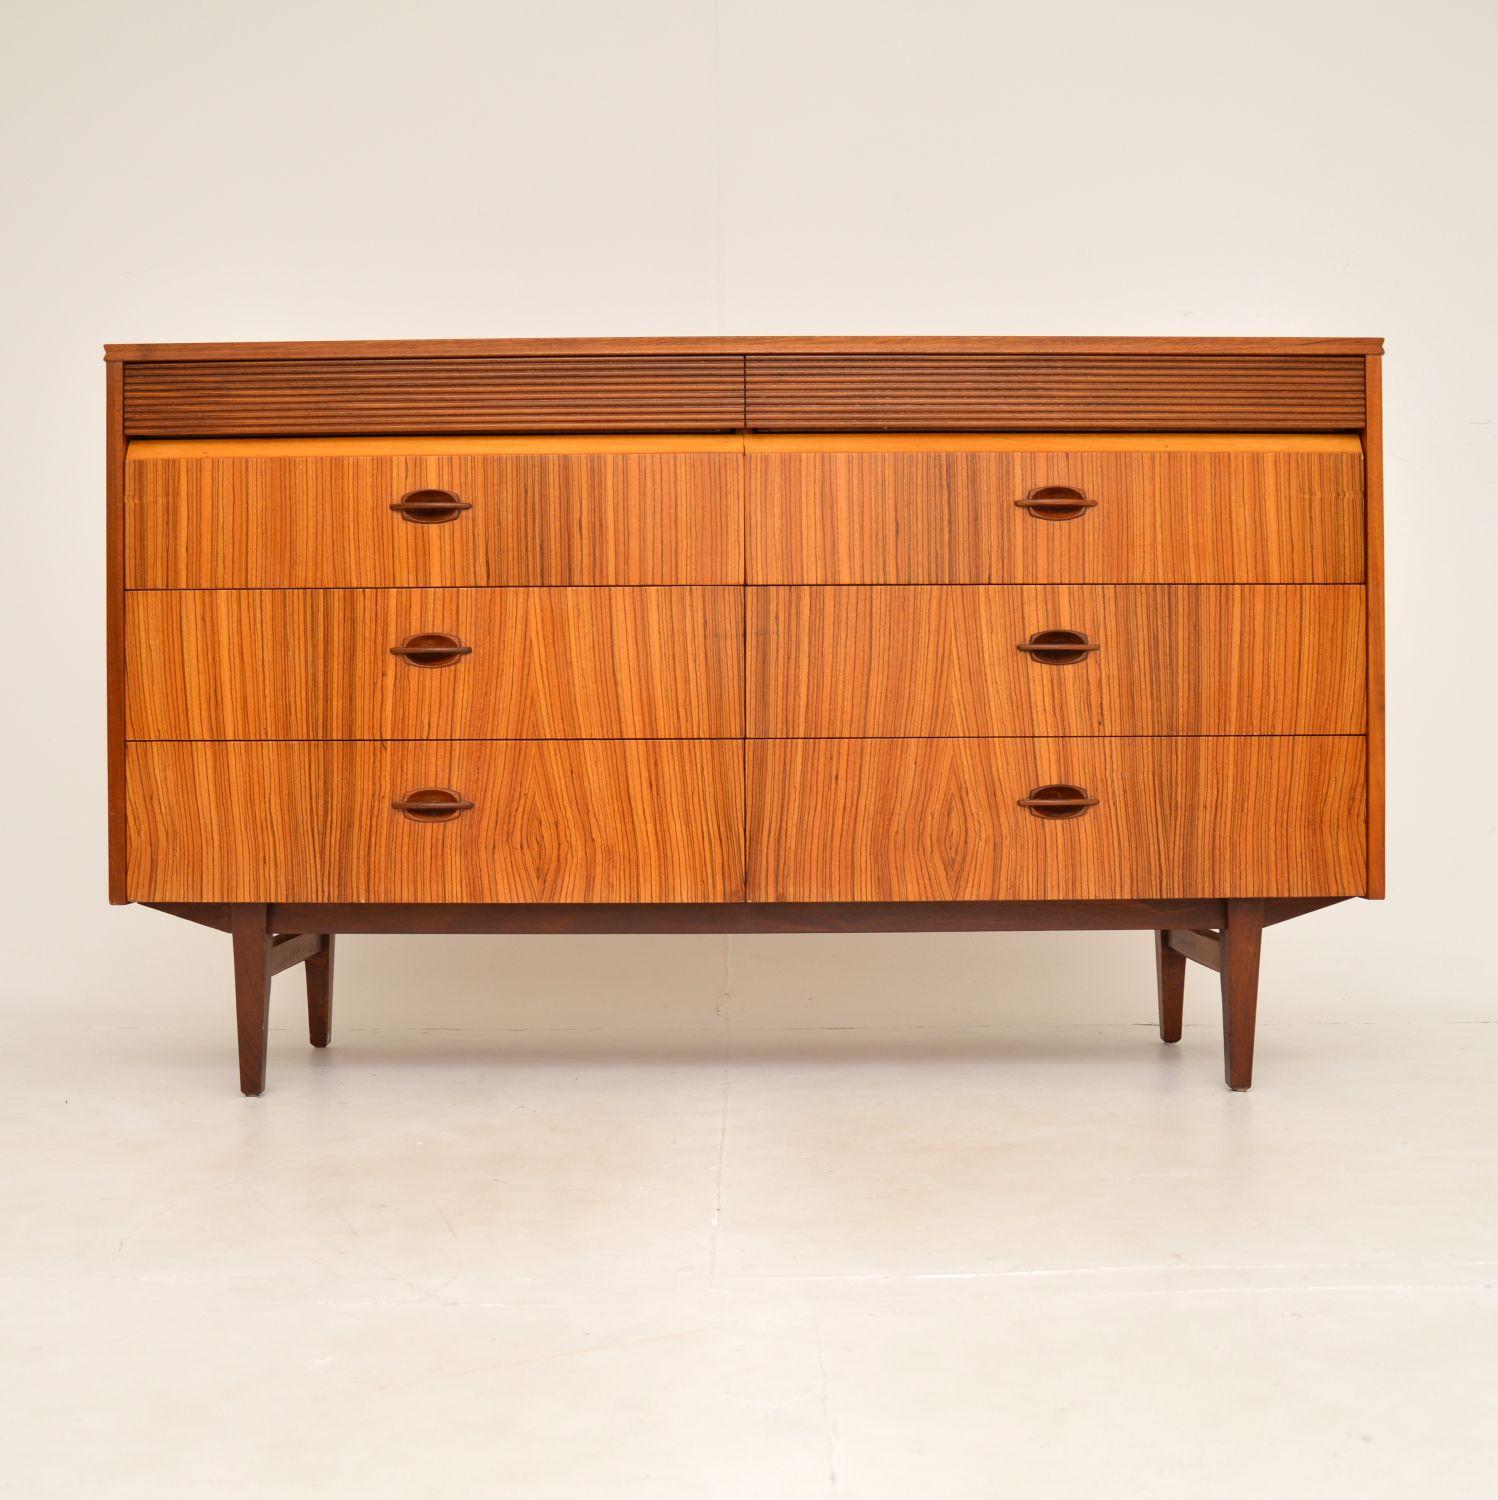 A stunning vintage sideboard / chest of drawers dating from the 1960’s. This was made in England by the high end manufacturer Elliot’s of Newbury.

The lower drawer fronts are made from striking Zebrano wood, the top and sides are Walnut. The top